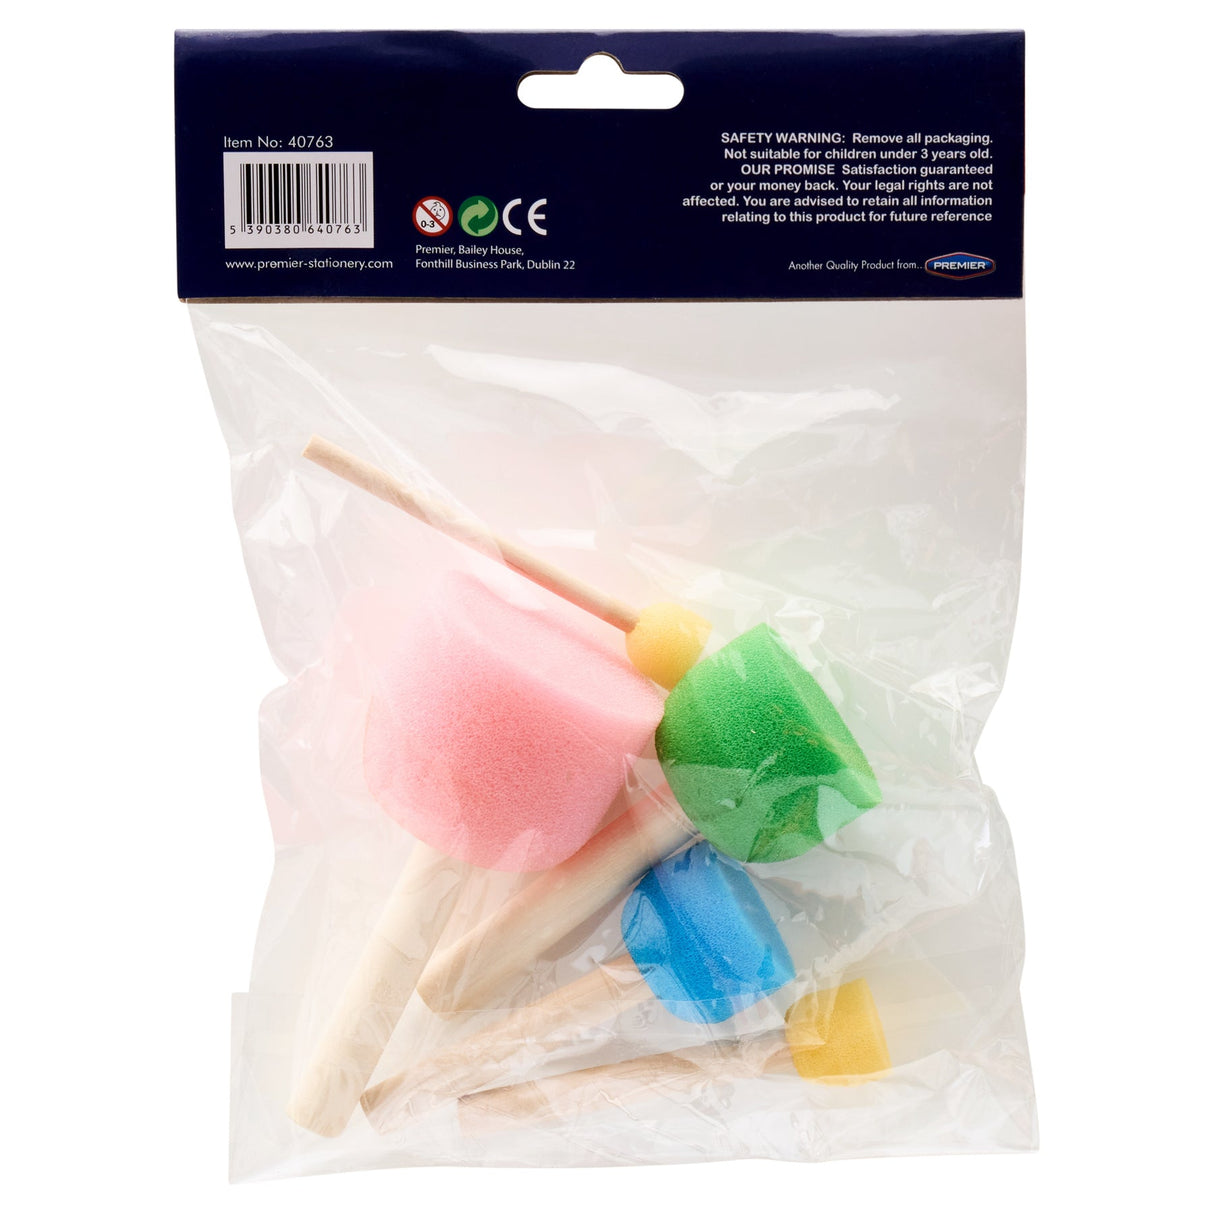 World of Colour Sponges - Pack of 5-Daubers & Blenders-World of Colour|StationeryShop.co.uk